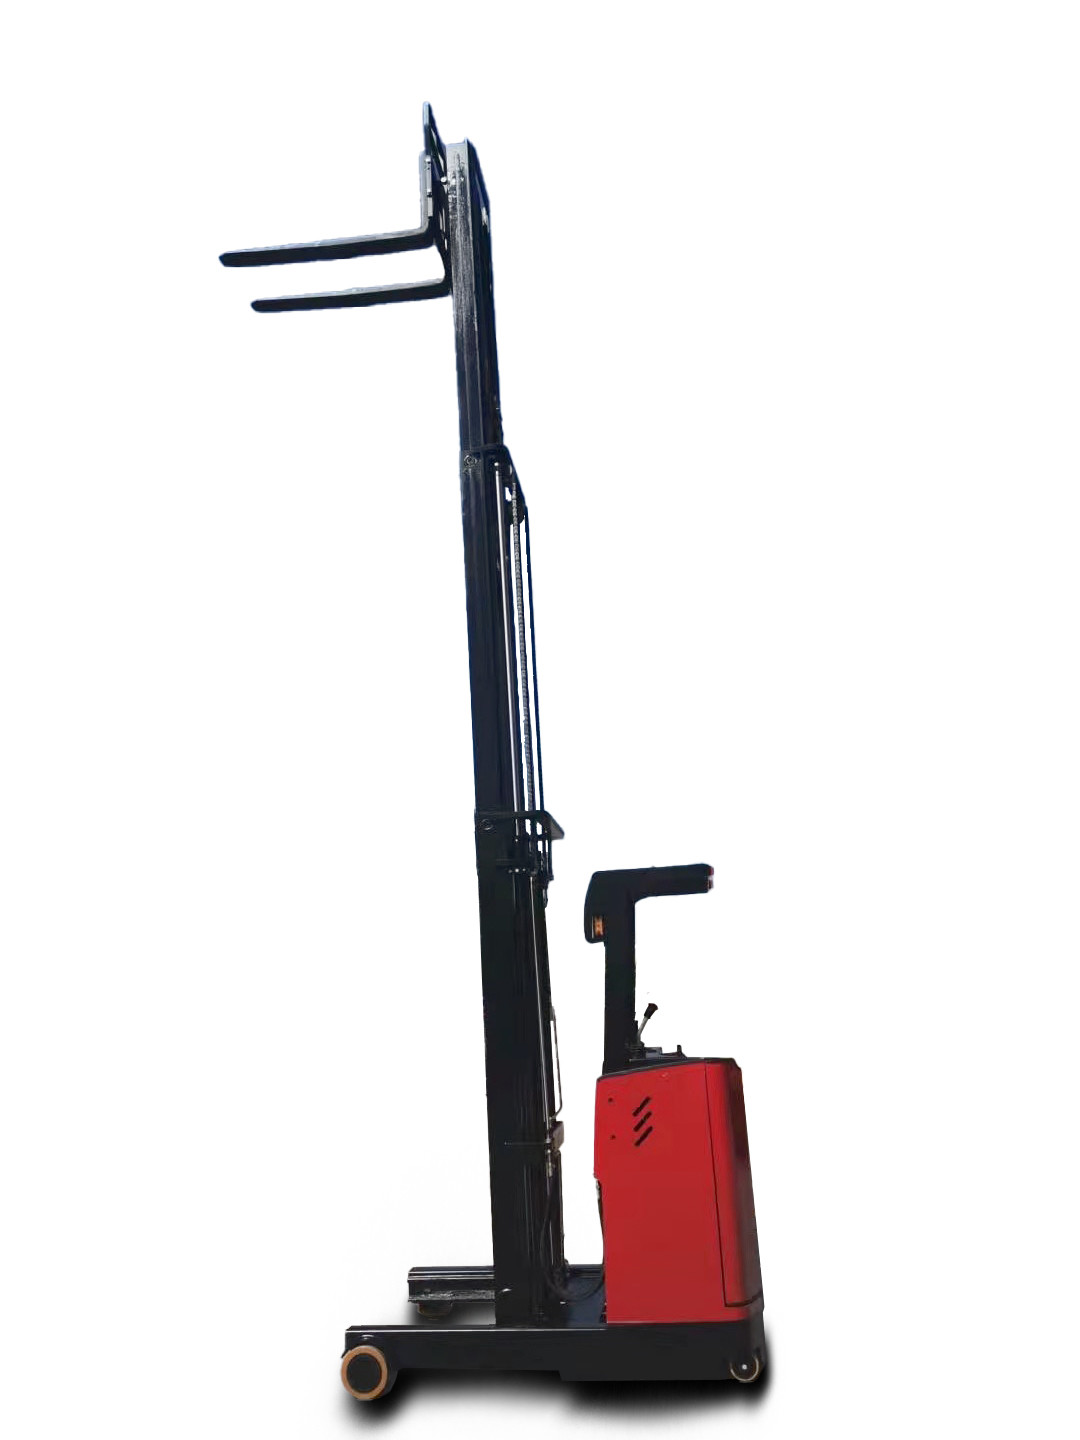 Hot sales stand up or sit down full electric reach truck 1T 2T 1000kg 2000kg 6m 8m 10m  can be customized as needed